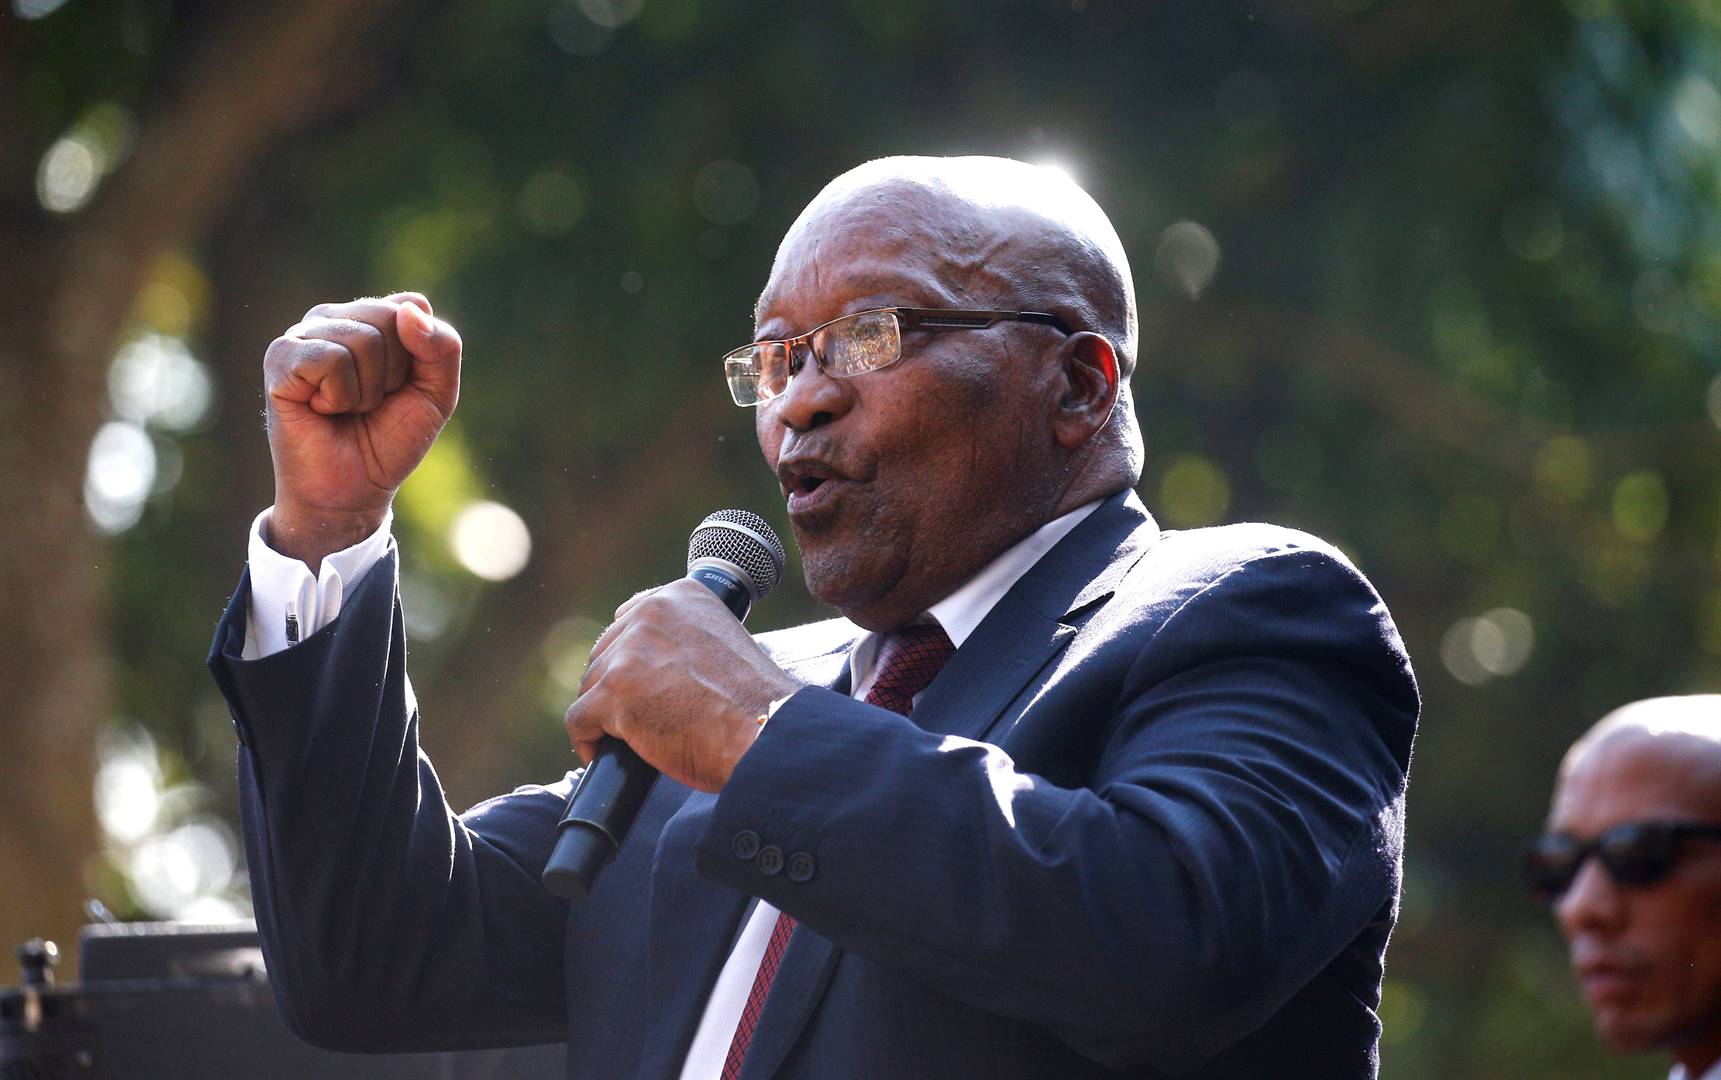 Jacob Zuma speaks to supporters after his appearance in the high court in Pietermaritzburg, where he is facing charges that include fraud, corruption and racketeering. Picture: Rogan Ward/Reuters